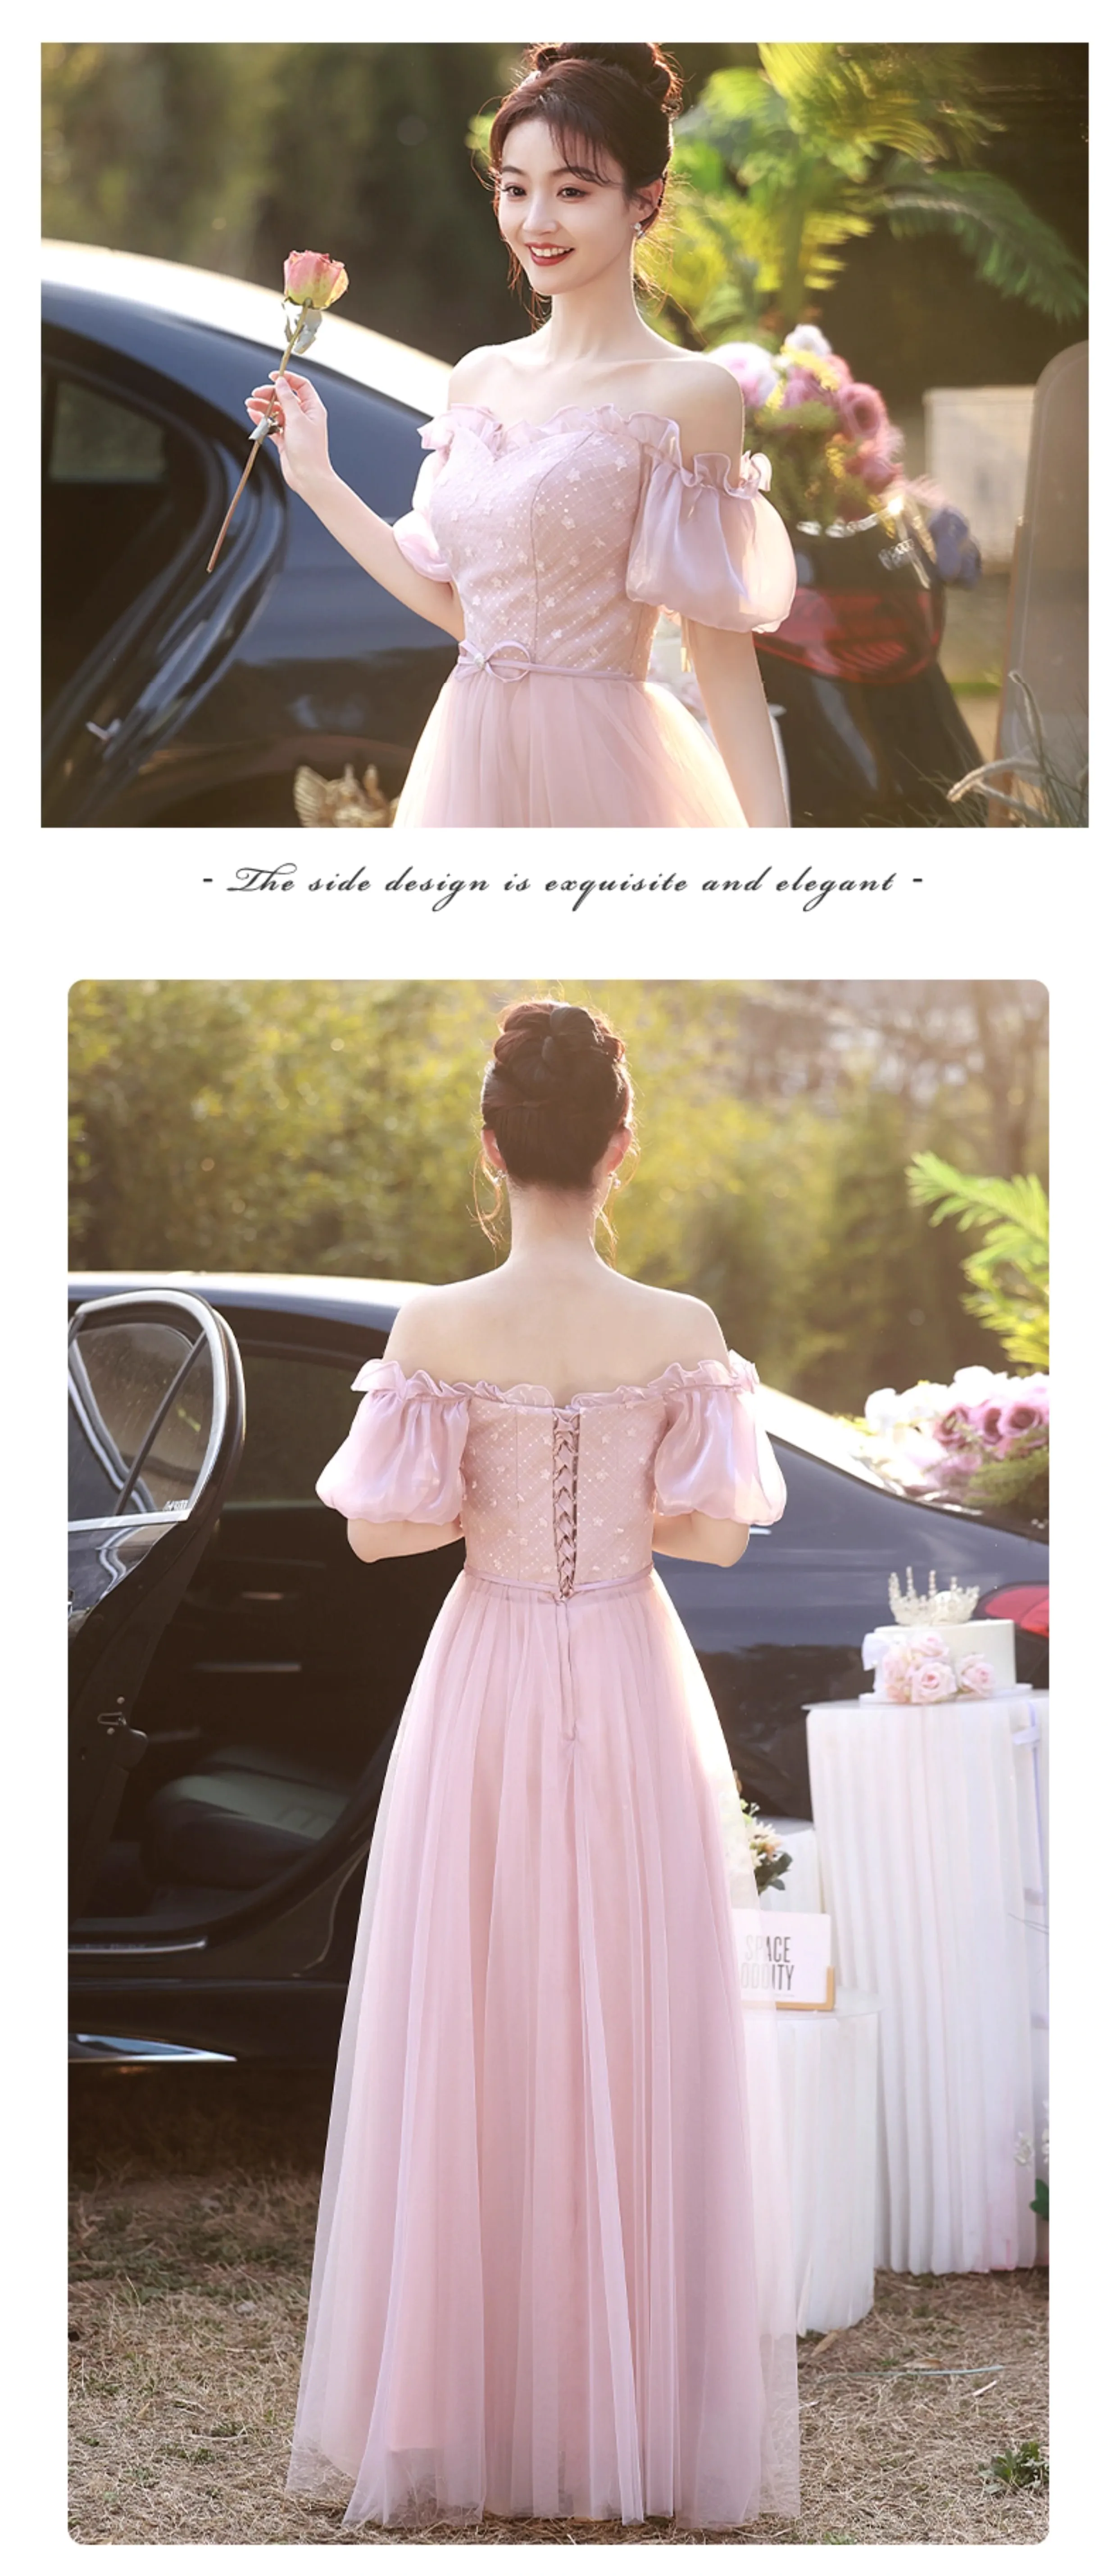 Sweet-Off-the-Shoulder-Pink-Birthday-Party-Bridesmaid-Dress-Evening-Gown25